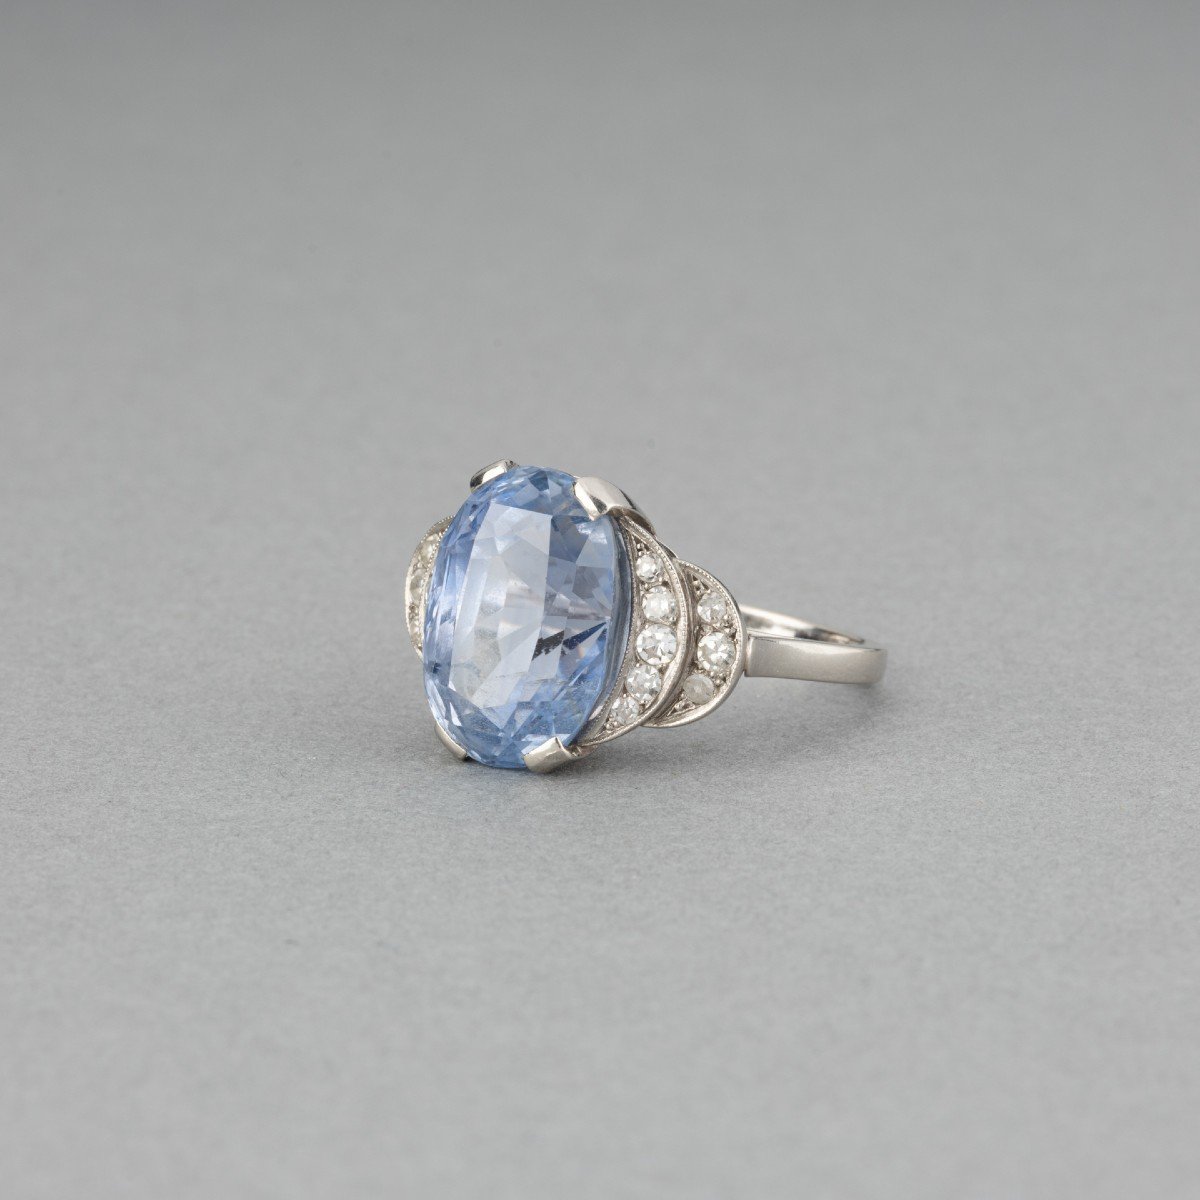 Antique French Platinum Ring With Diamonds And Certified Ceylon Sapphire Of 9.84 Carats-photo-3